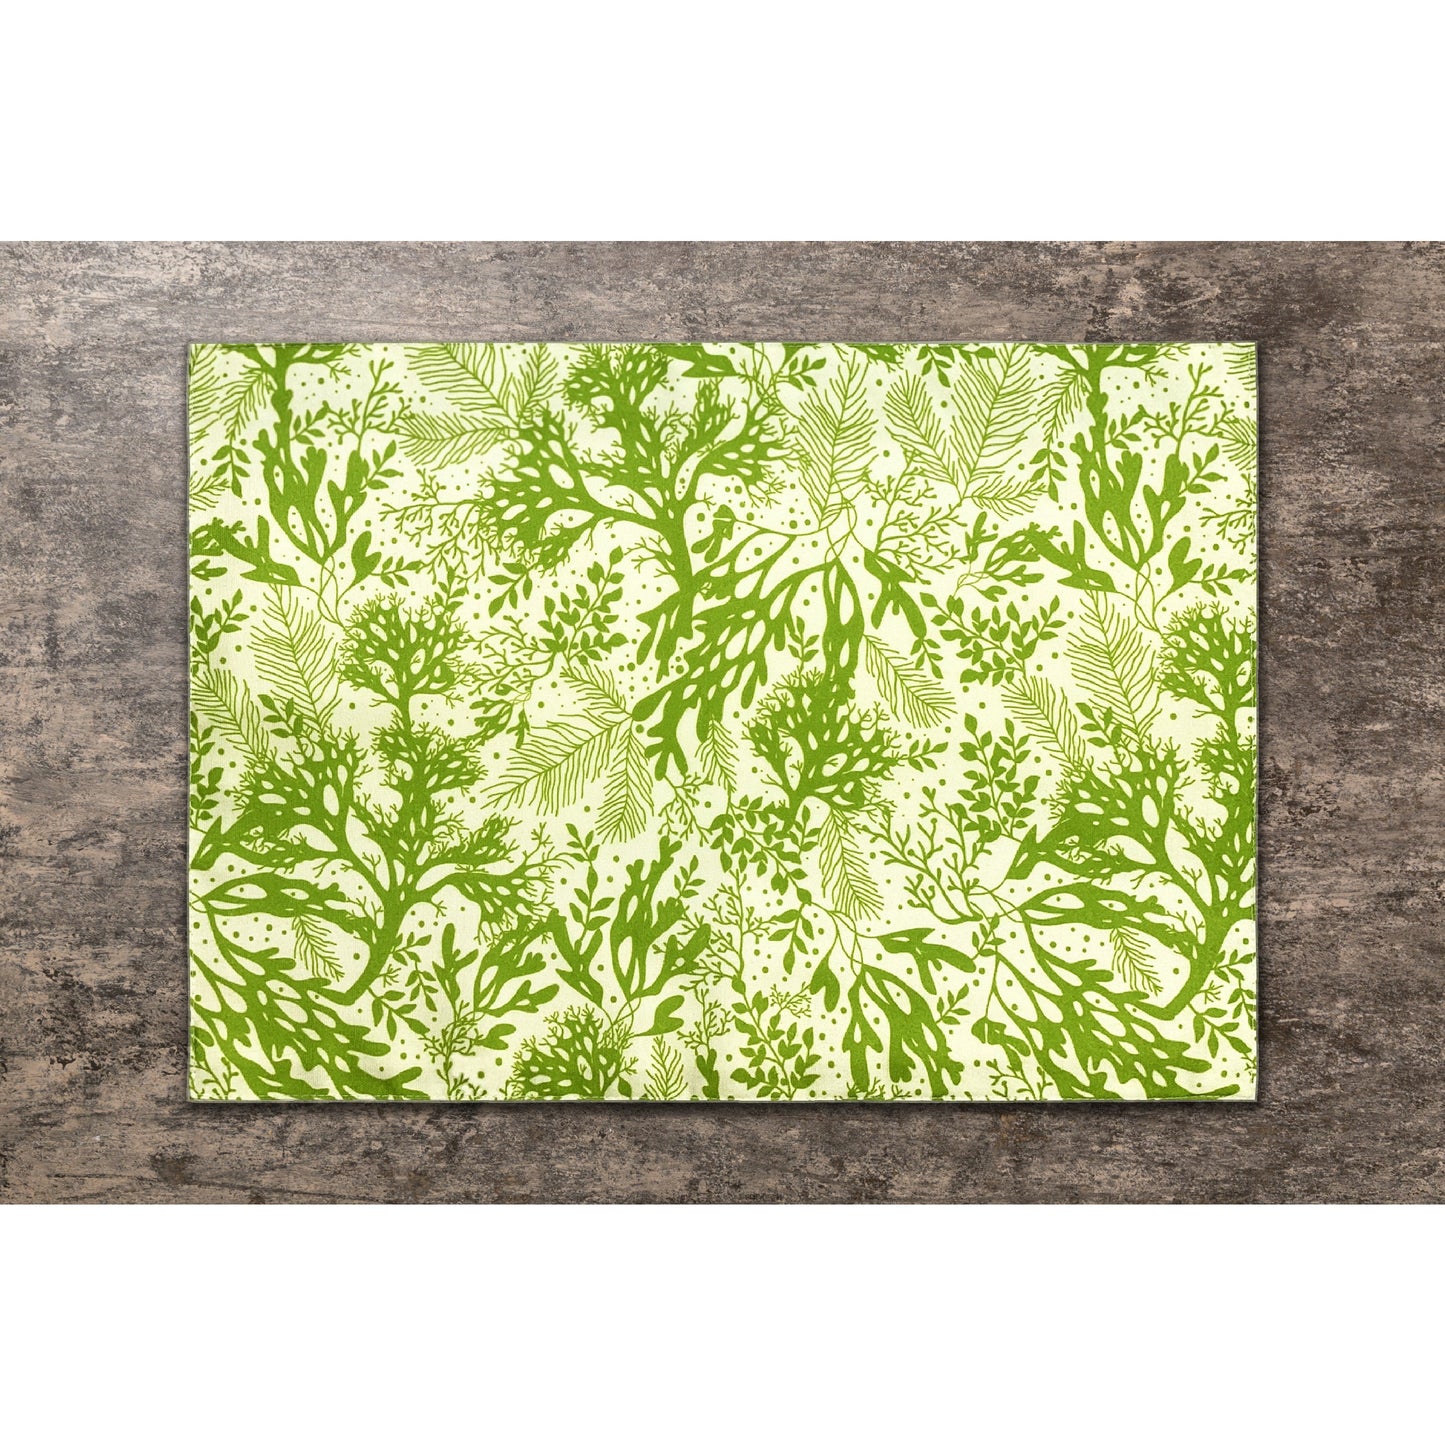 Set of 4 Summer Plants Placemat, Green Branches and Leaves Pattern, Machine washable Cotton Placemat